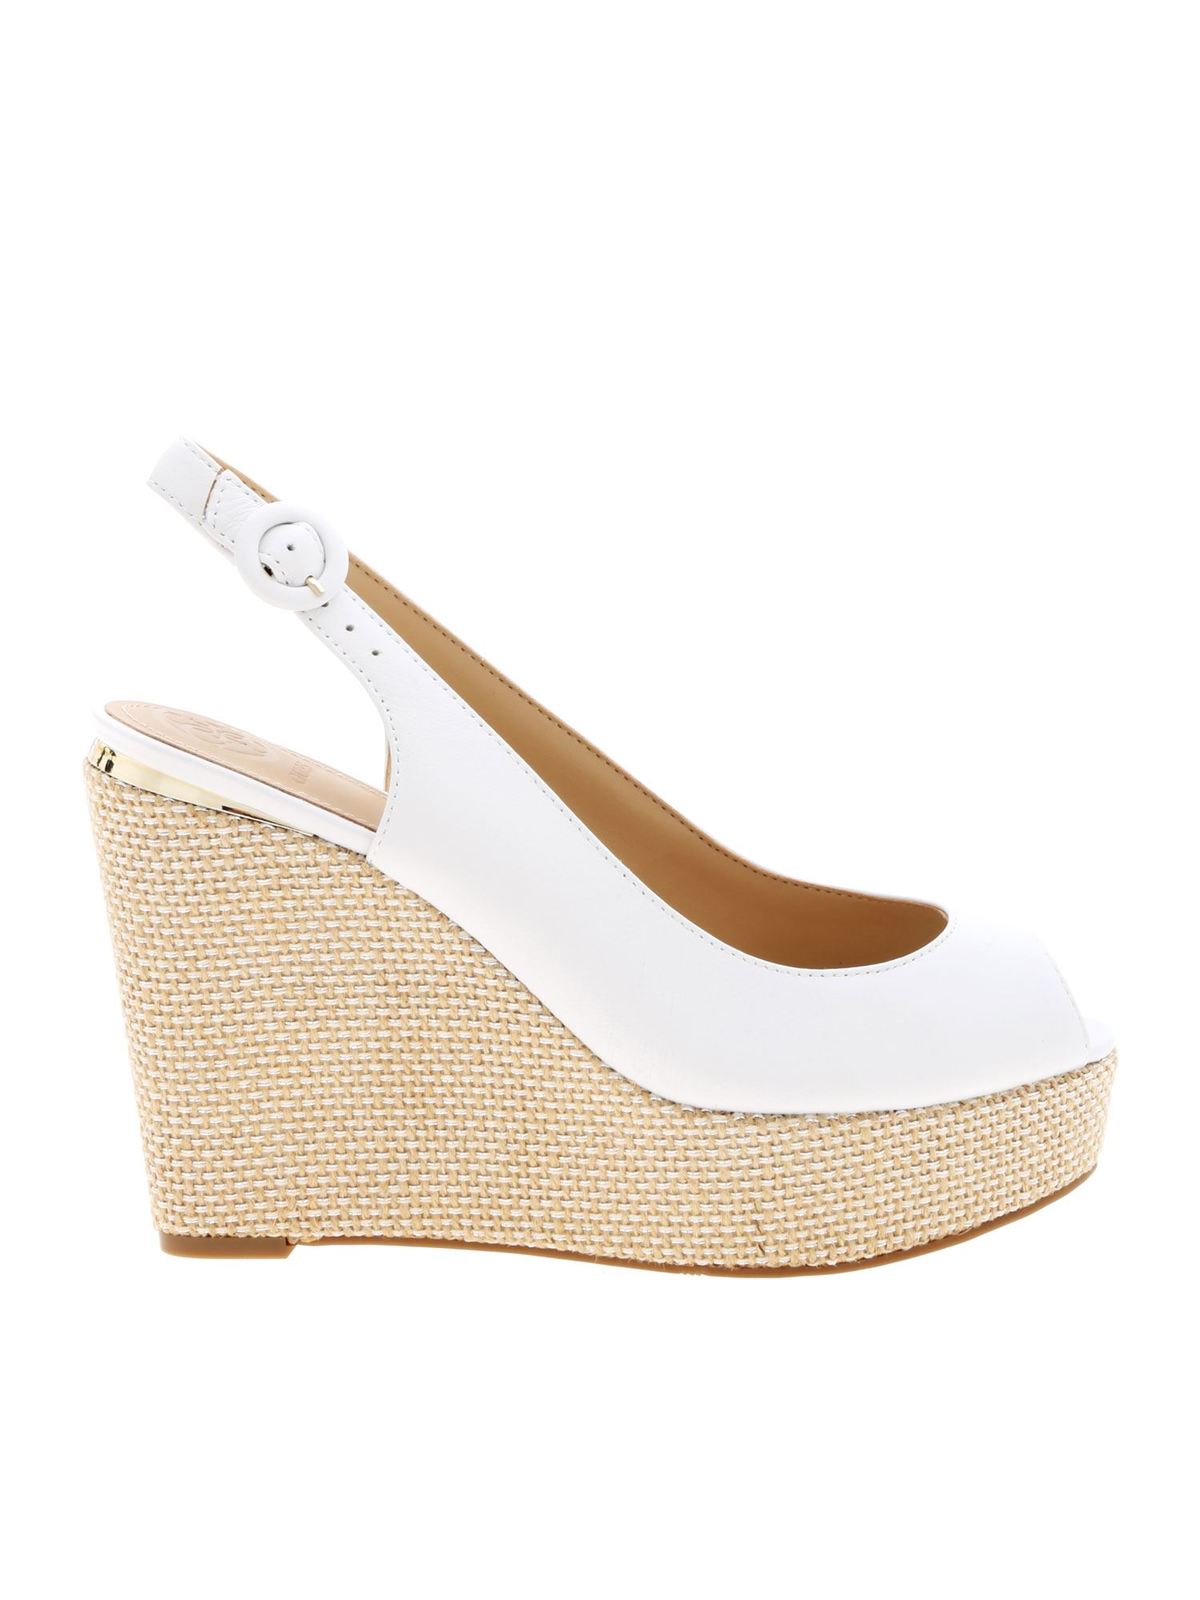 Guess - Hardy wedges in white leather 